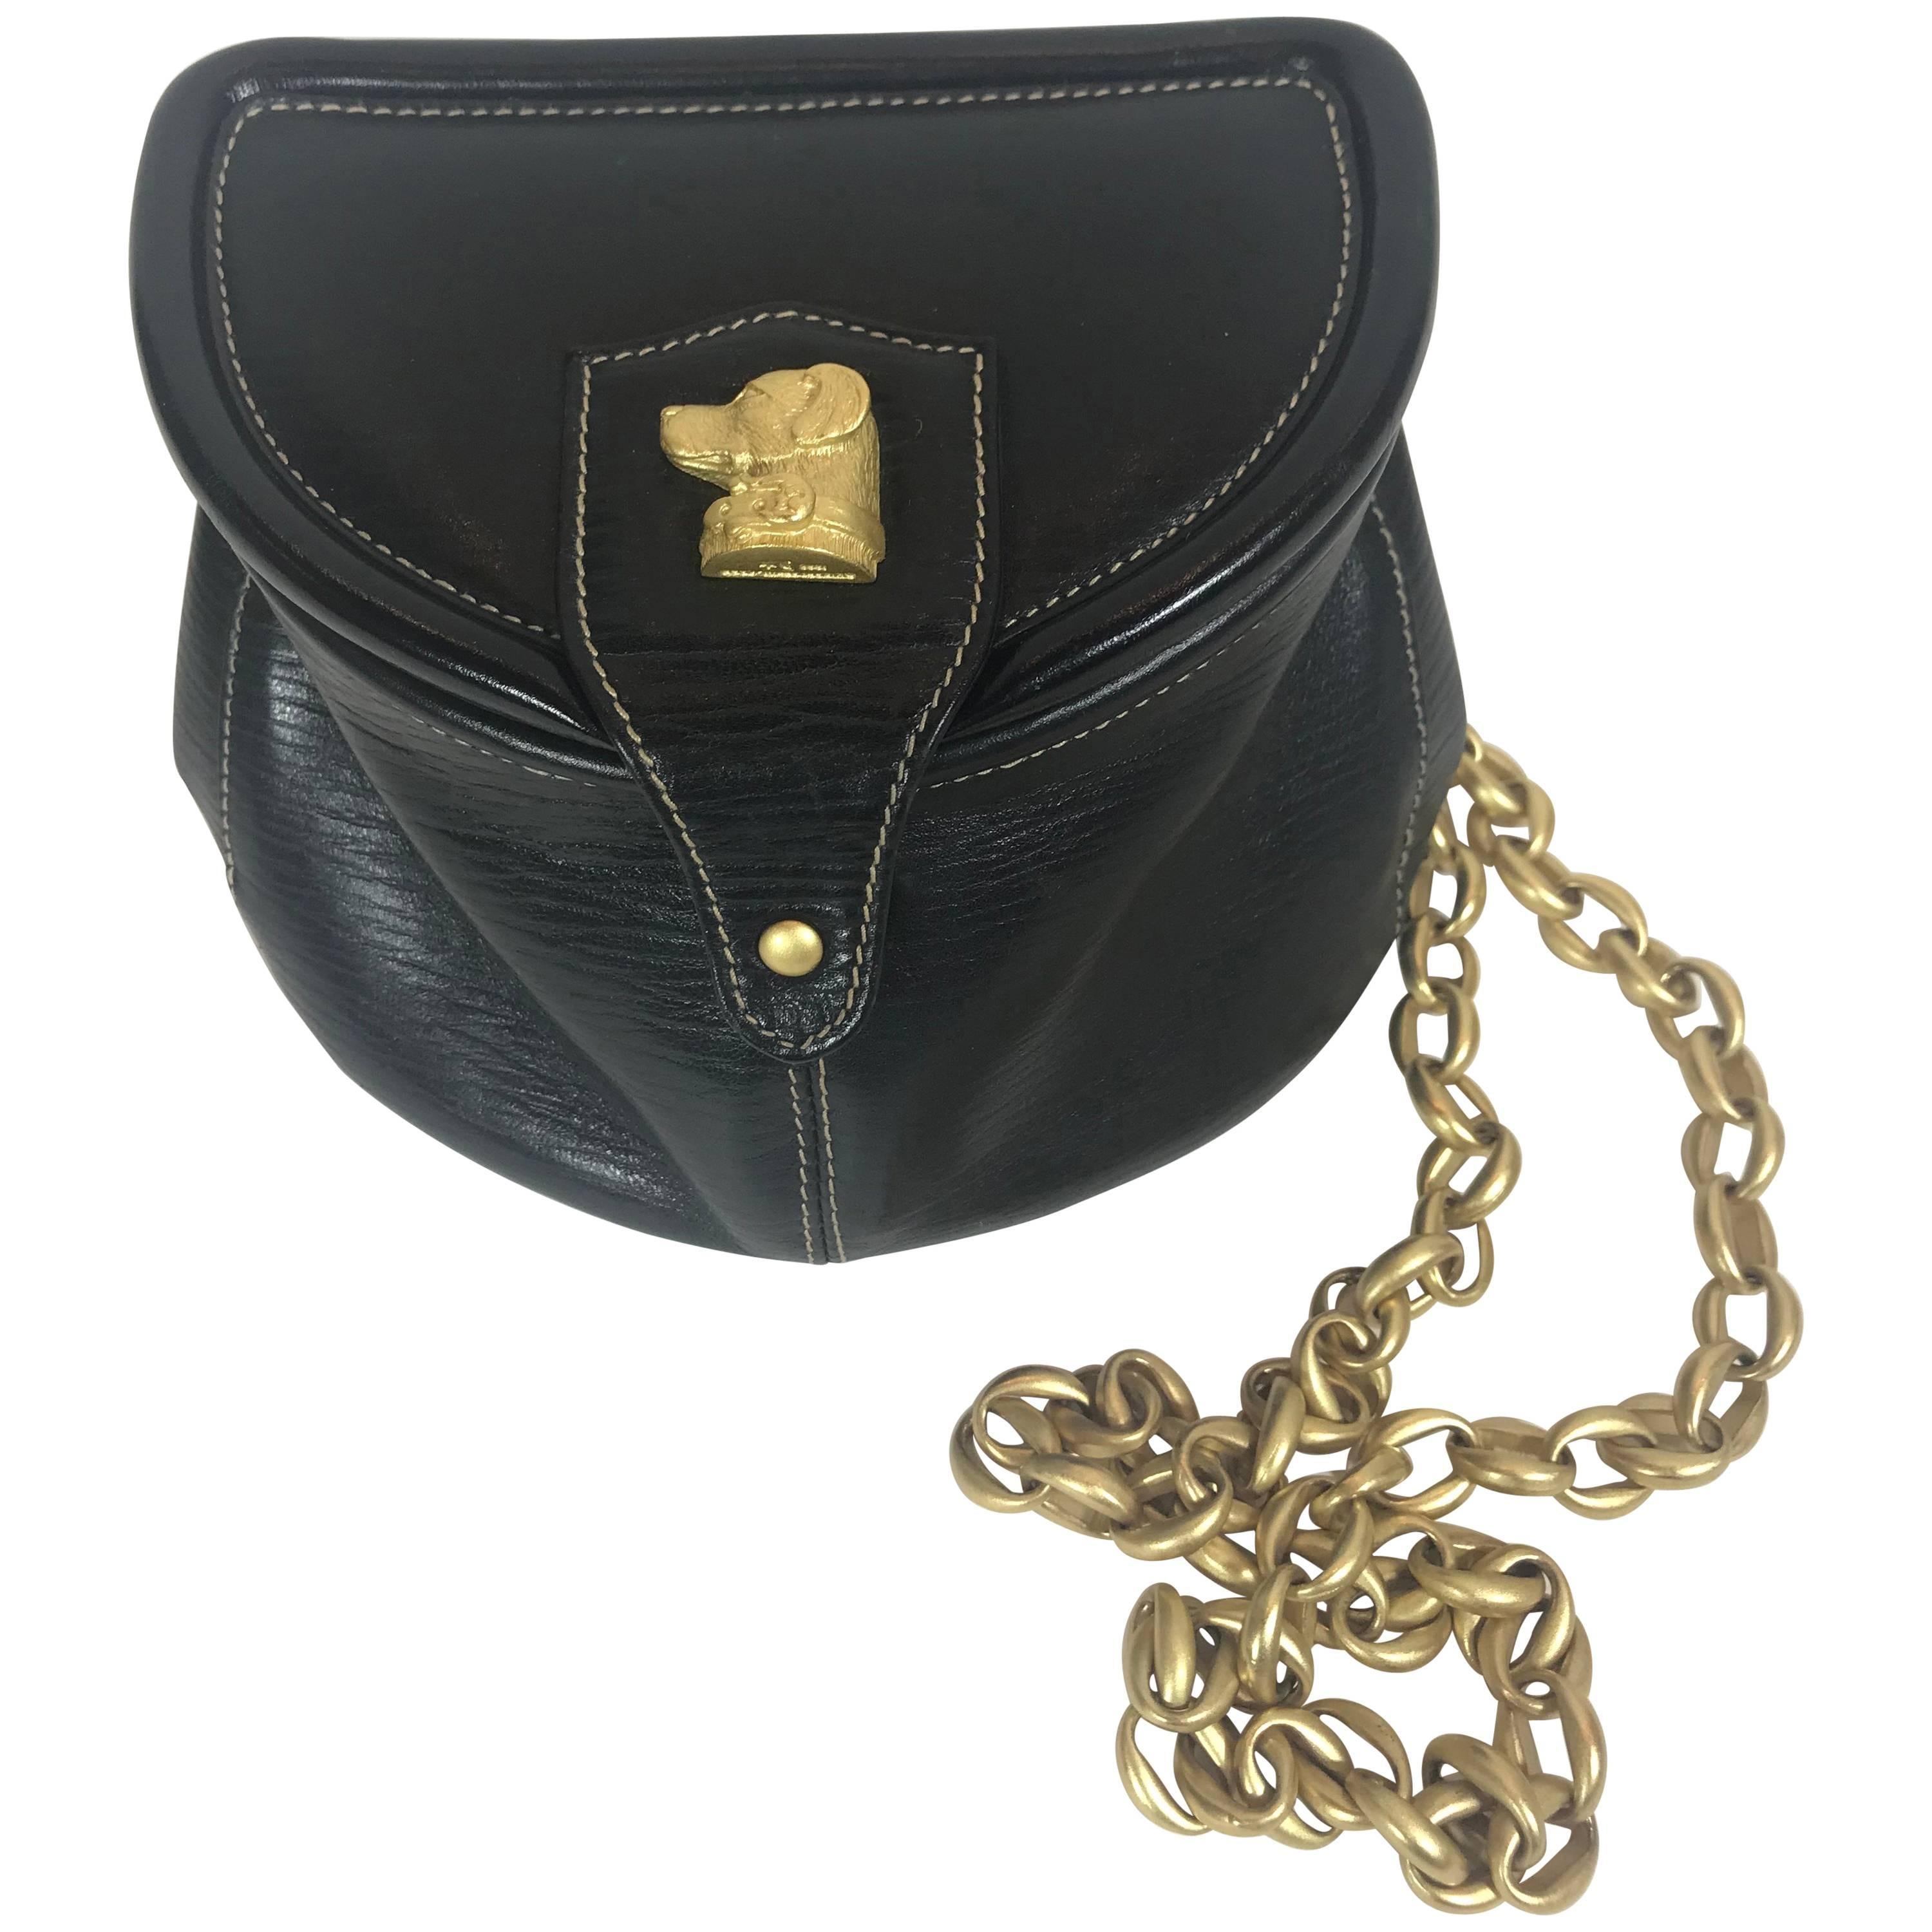 Barry Kieselstein-Cord Small Leather Crossbody Bag For Sale